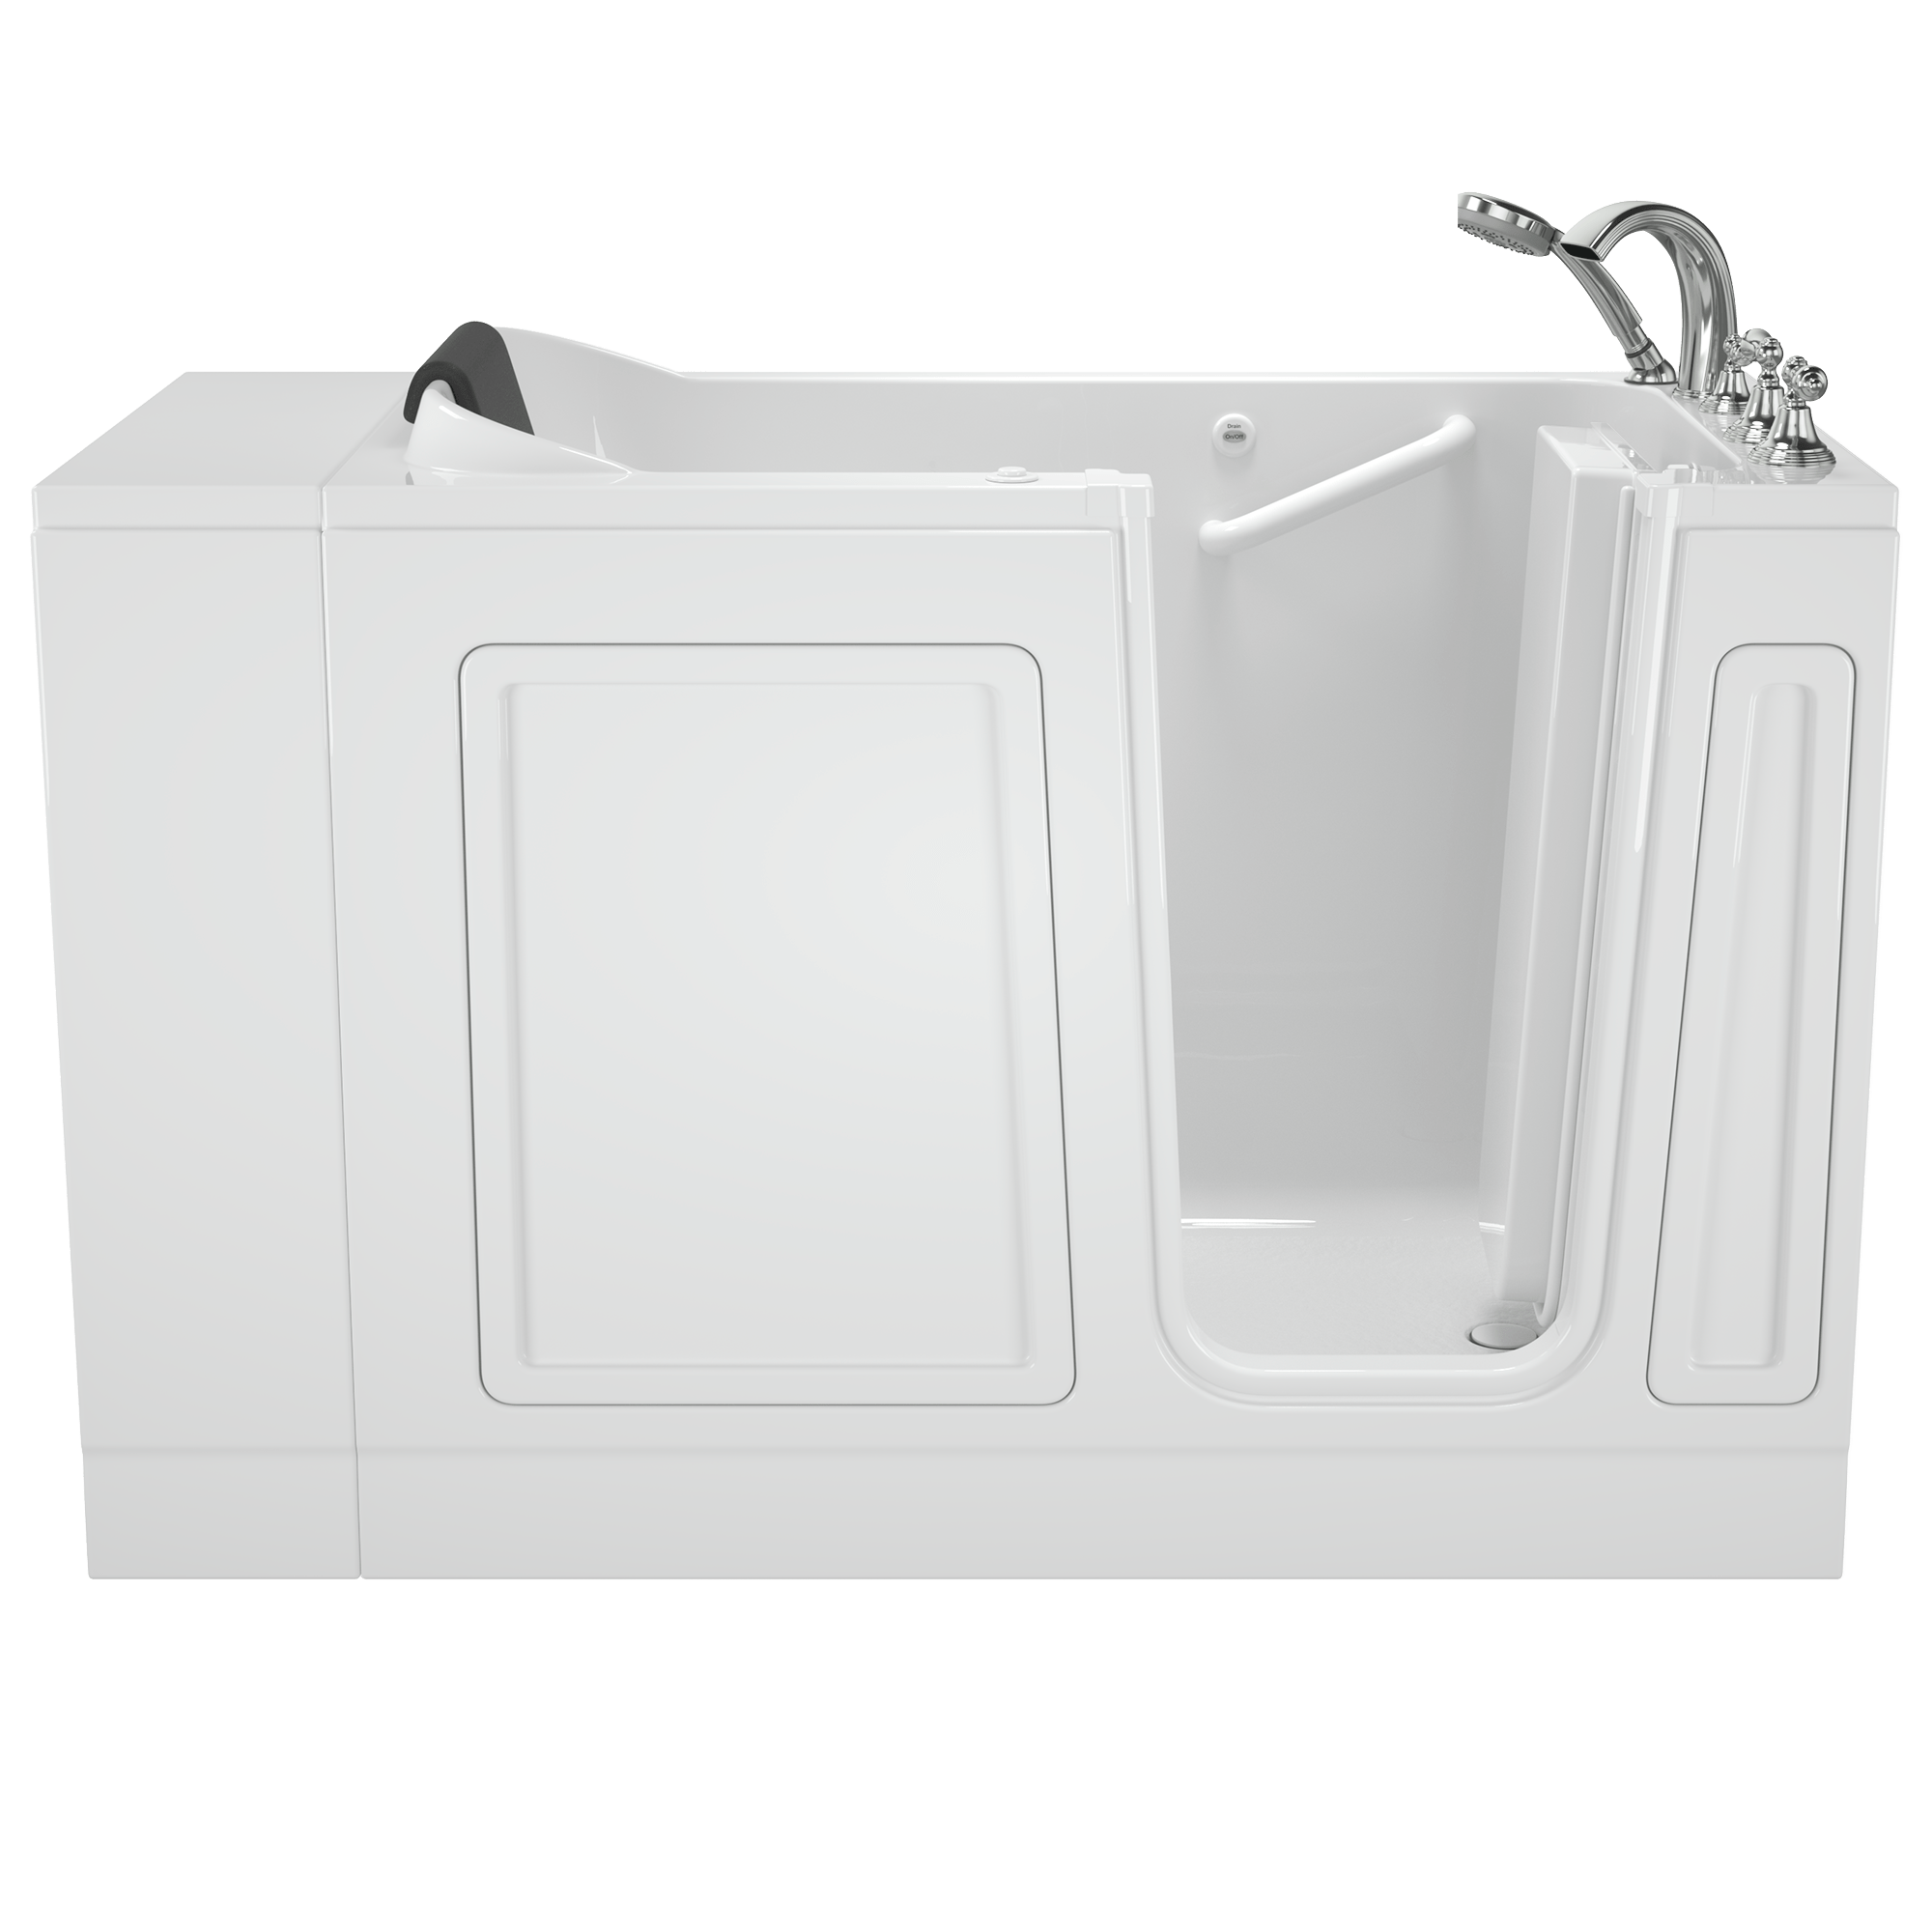 Acrylic Luxury Series 28 x 48-Inch Walk-in Tub With Air Spa System - Right-Hand Drain With Faucet